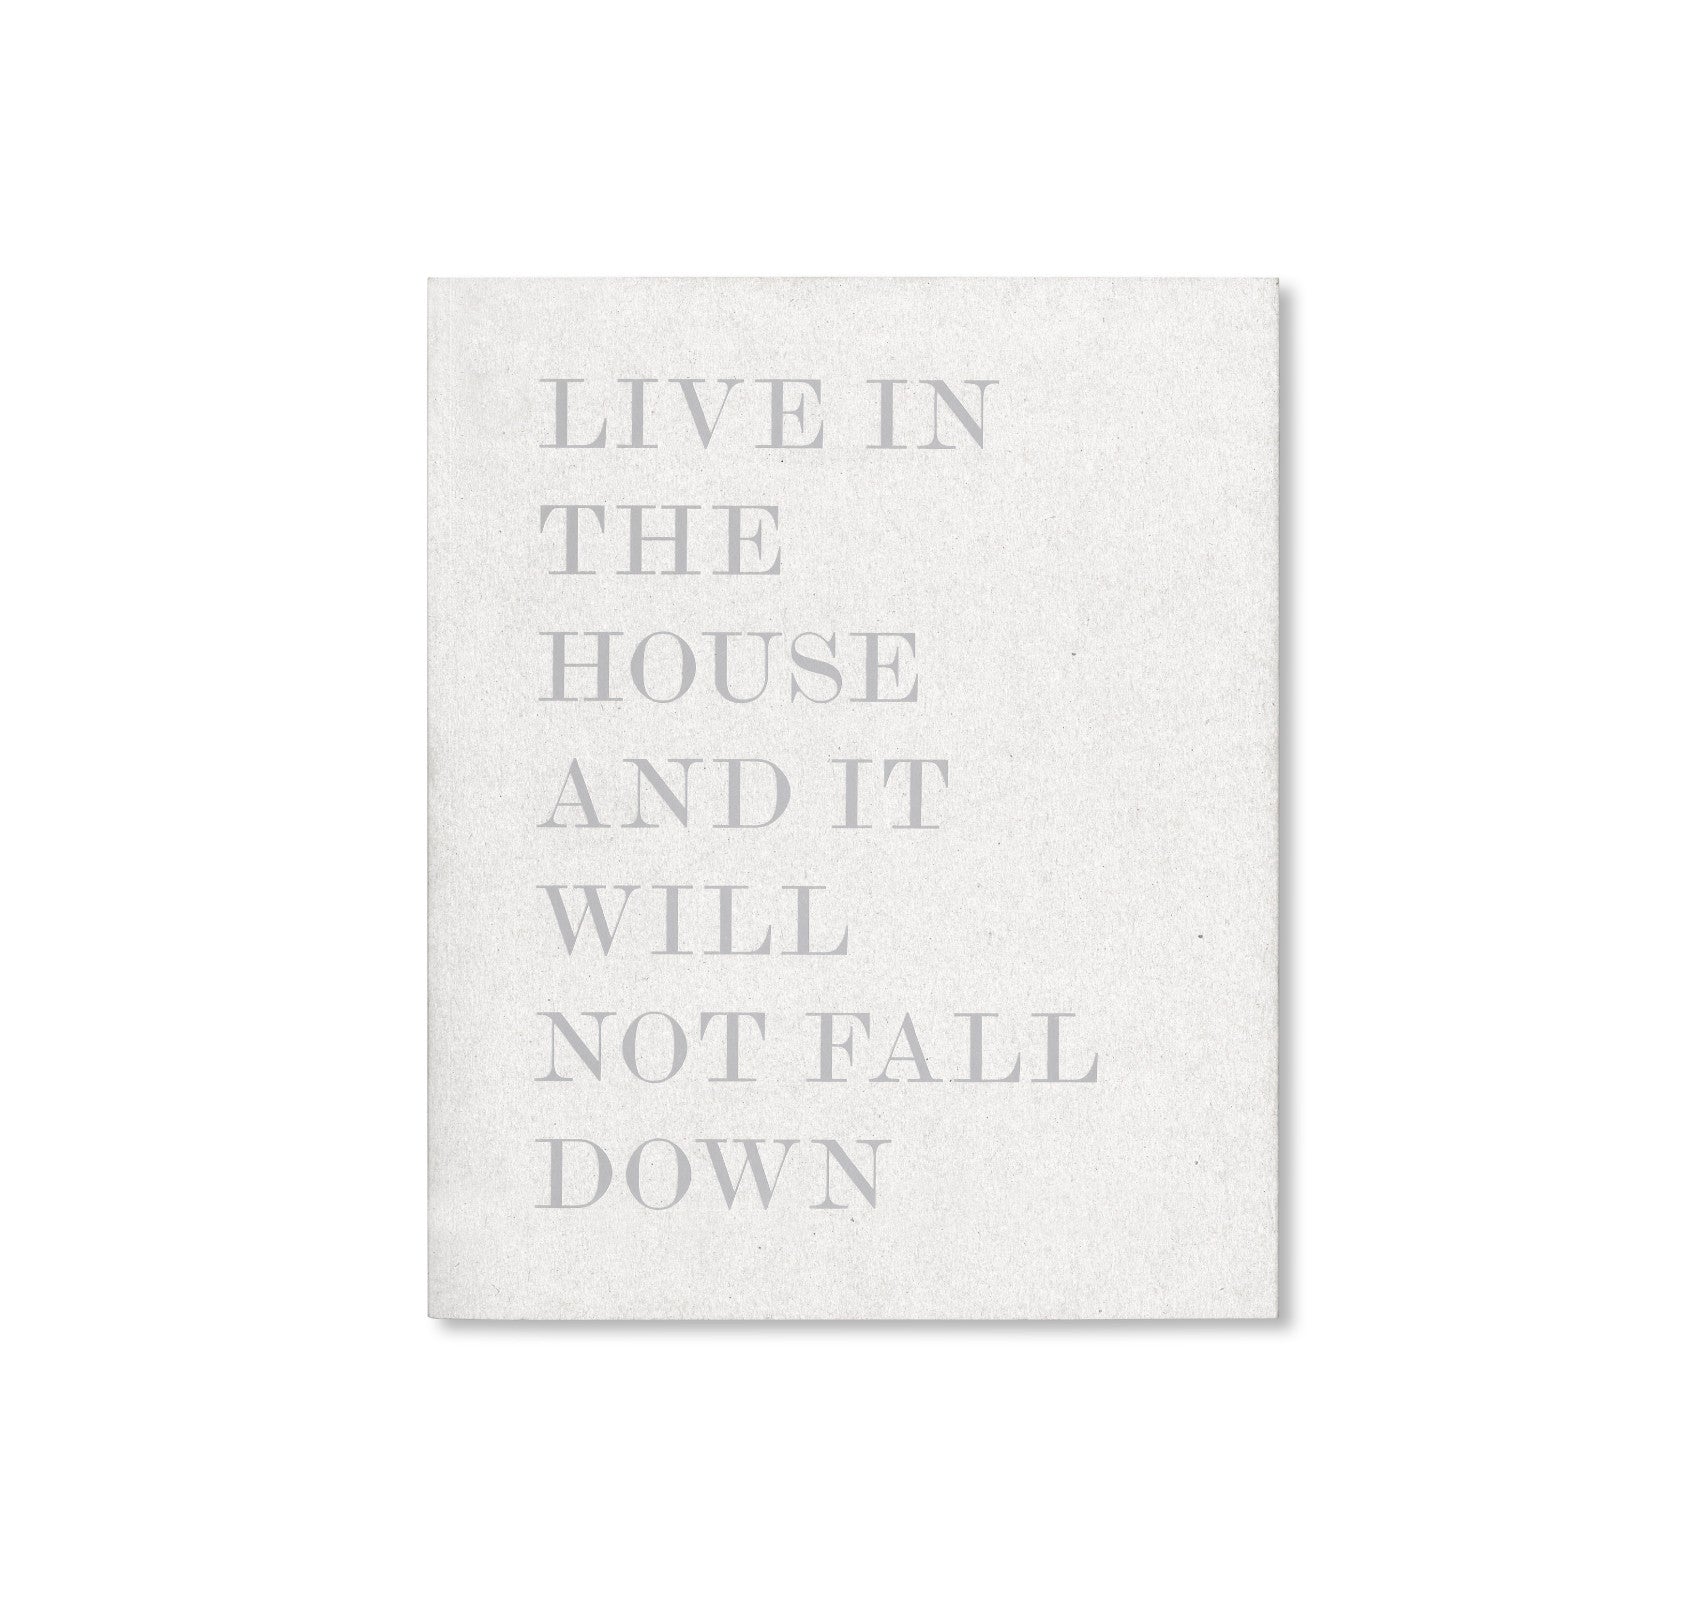 LIVE IN THE HOUSE AND IT WILL NOT FALL DOWN by Alessandro Laita + Chiaralice Rizzi [SIGNED]